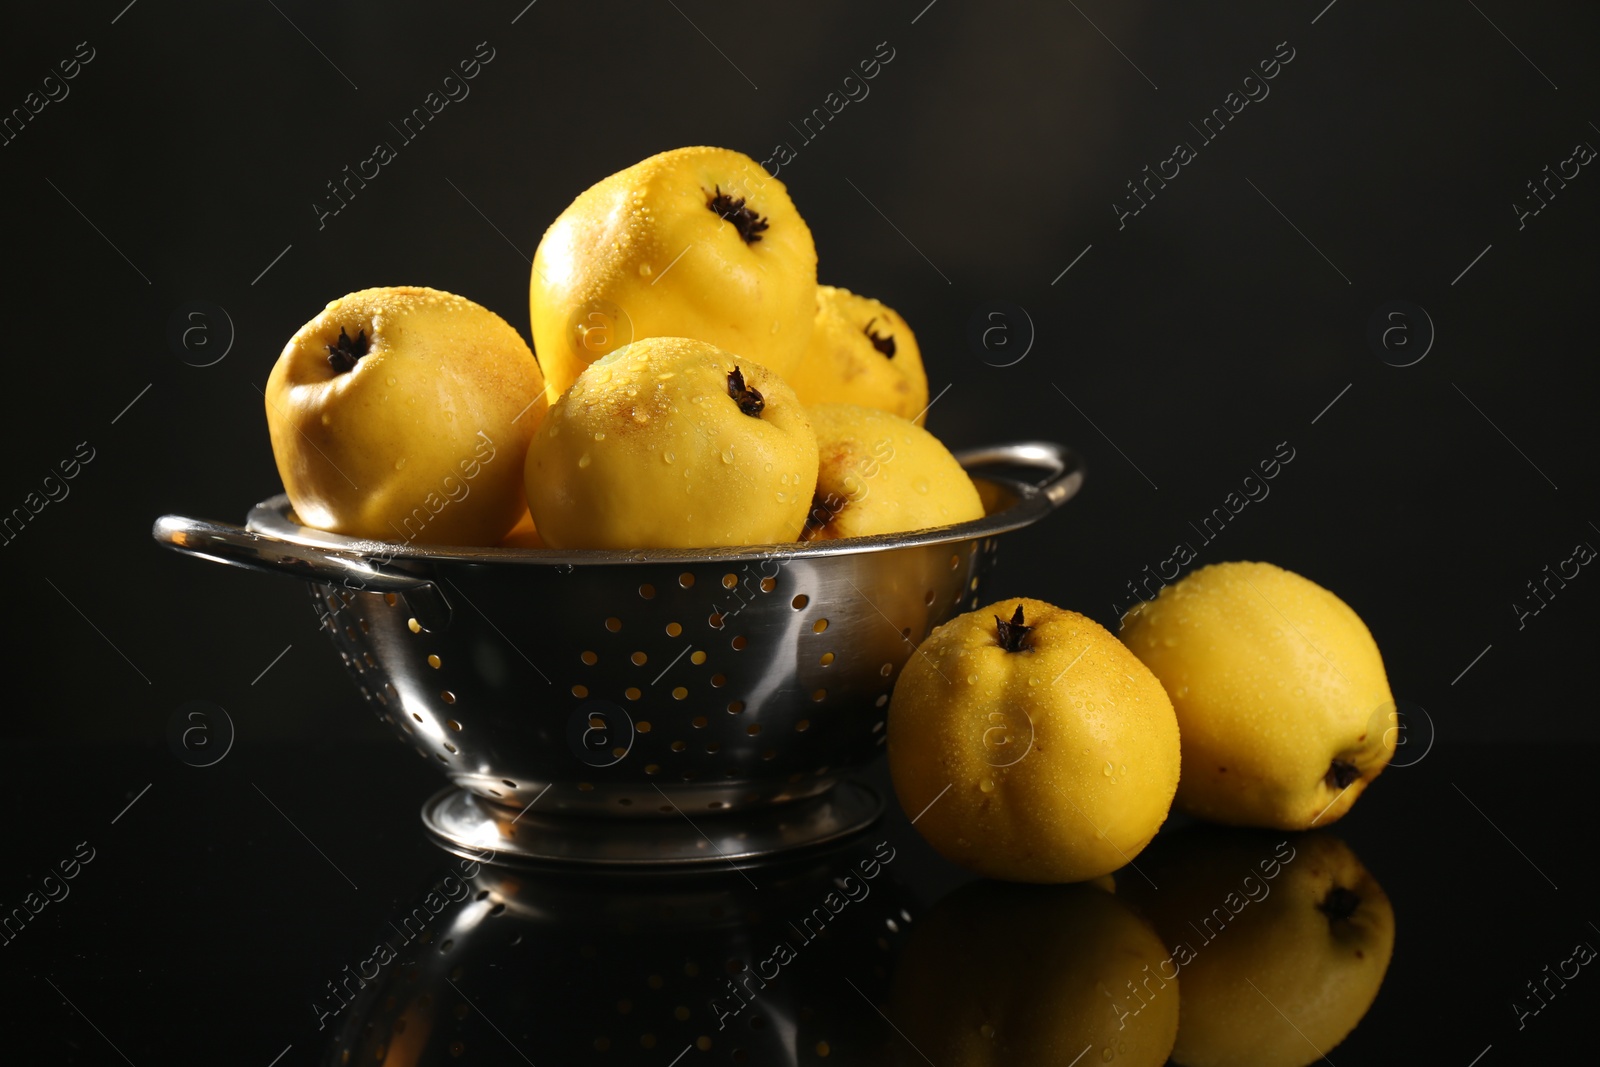 Photo of Tasty ripe quinces and metal colander on black mirror surface